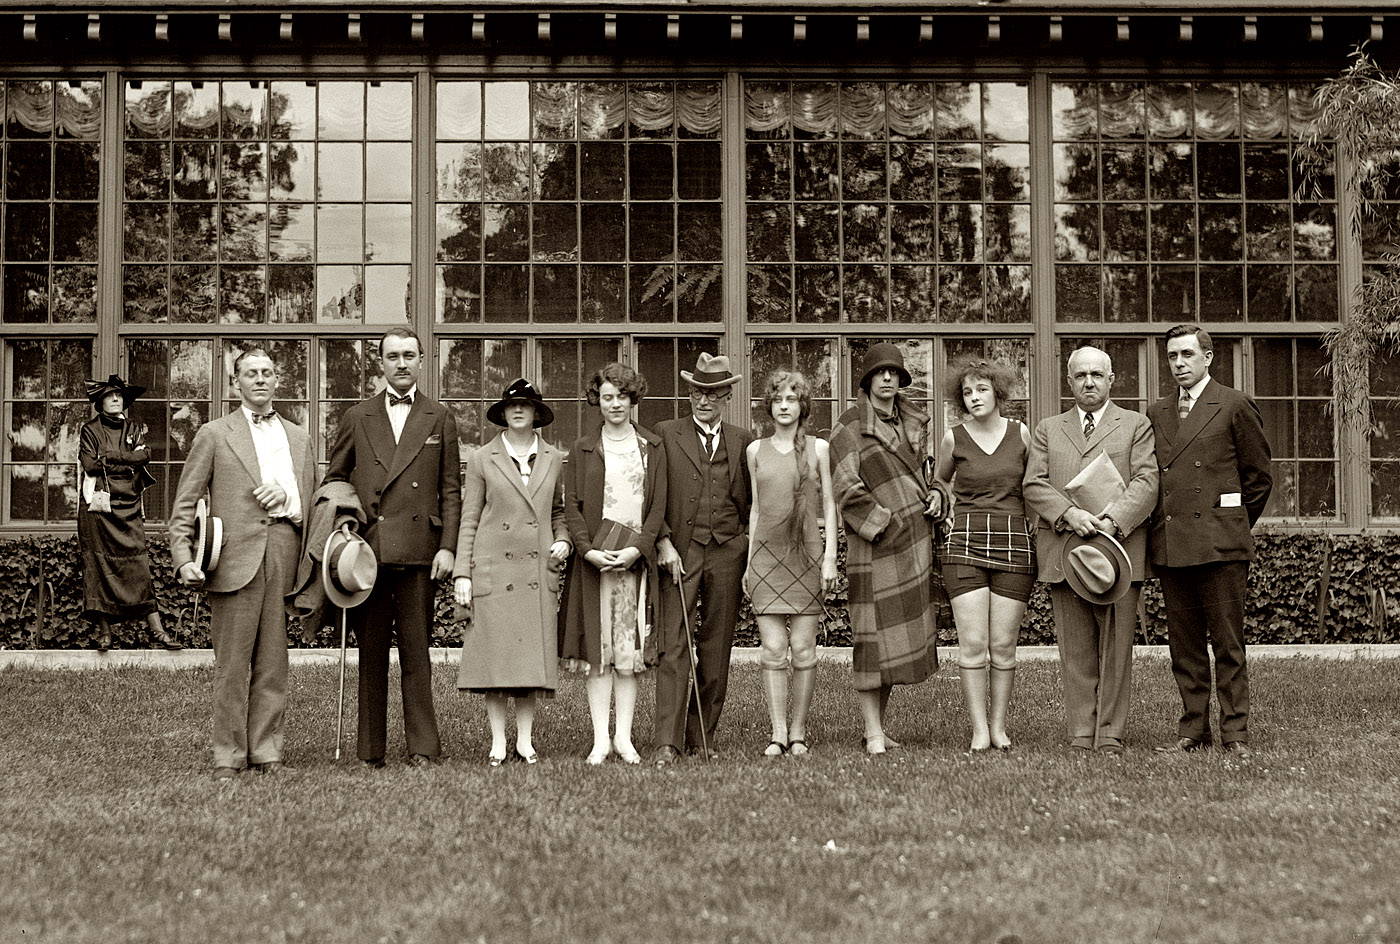 May 25, 1925. "Winners and judges, Paramount Motion Picture School." Our third shot of these people. View full size. National Photo Company Collection.